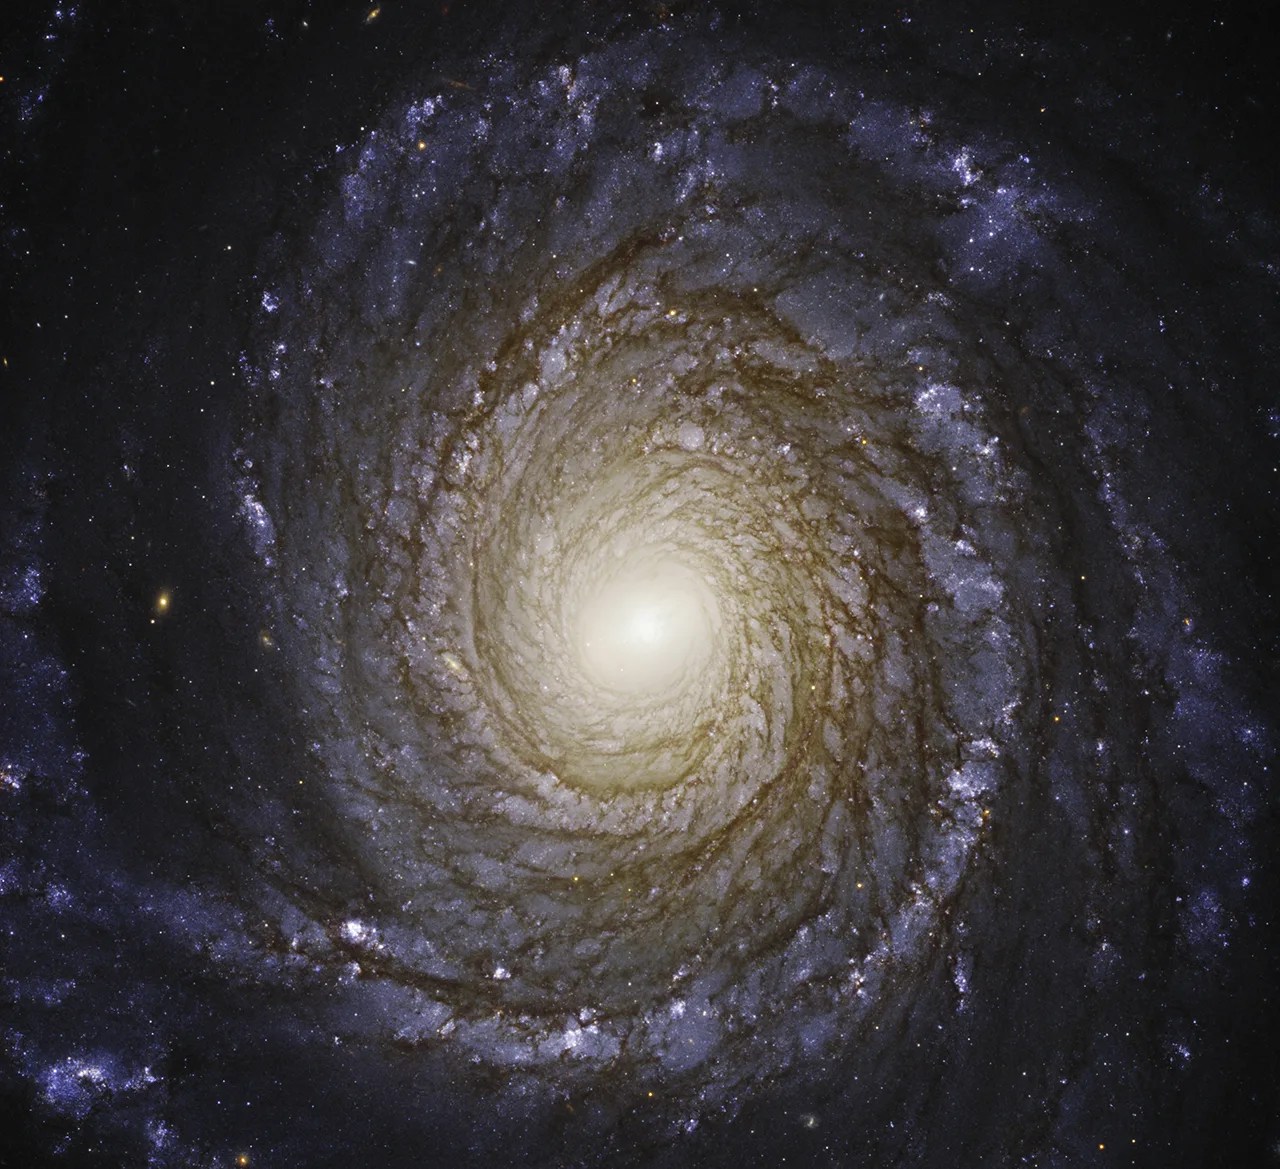 Spiral galaxy NGC 3147 with a glowing golden core and bluish arms seen face-on.